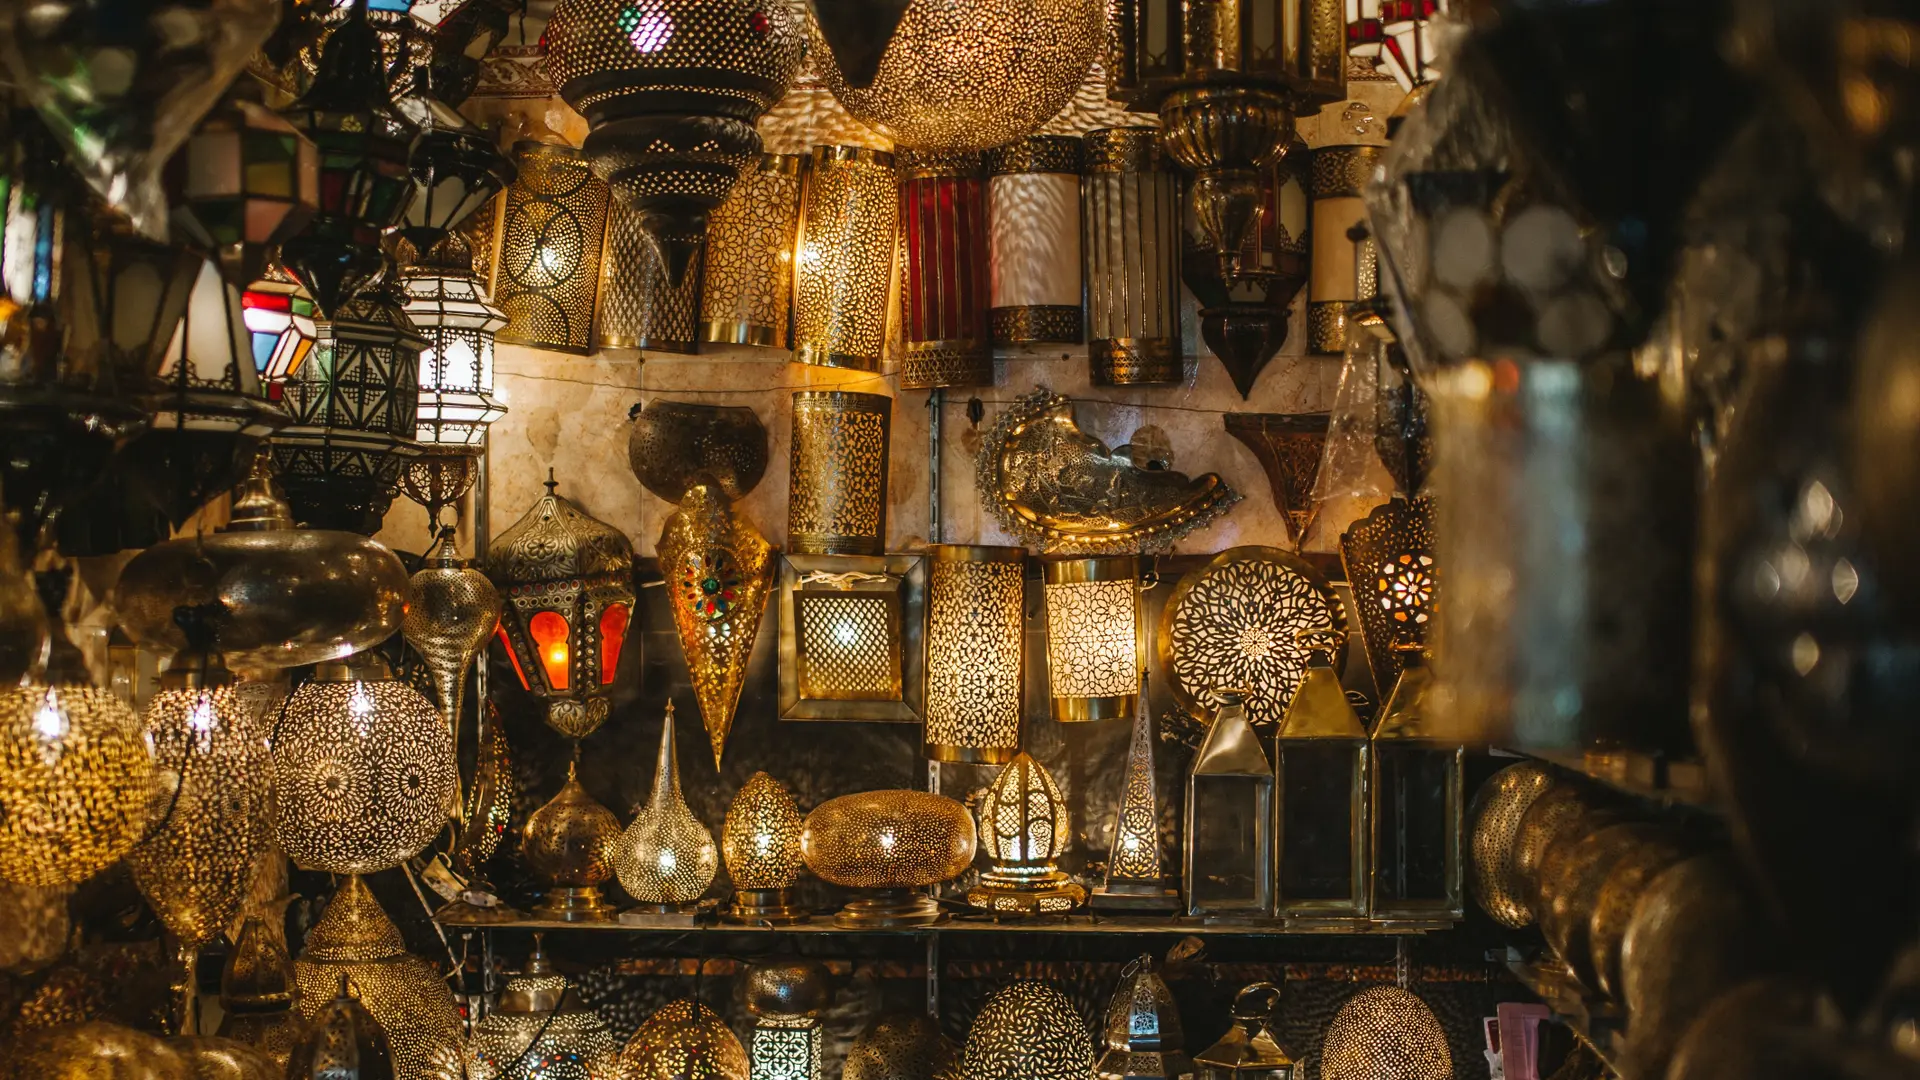 Many moroccan lamps and aladin lanterns.